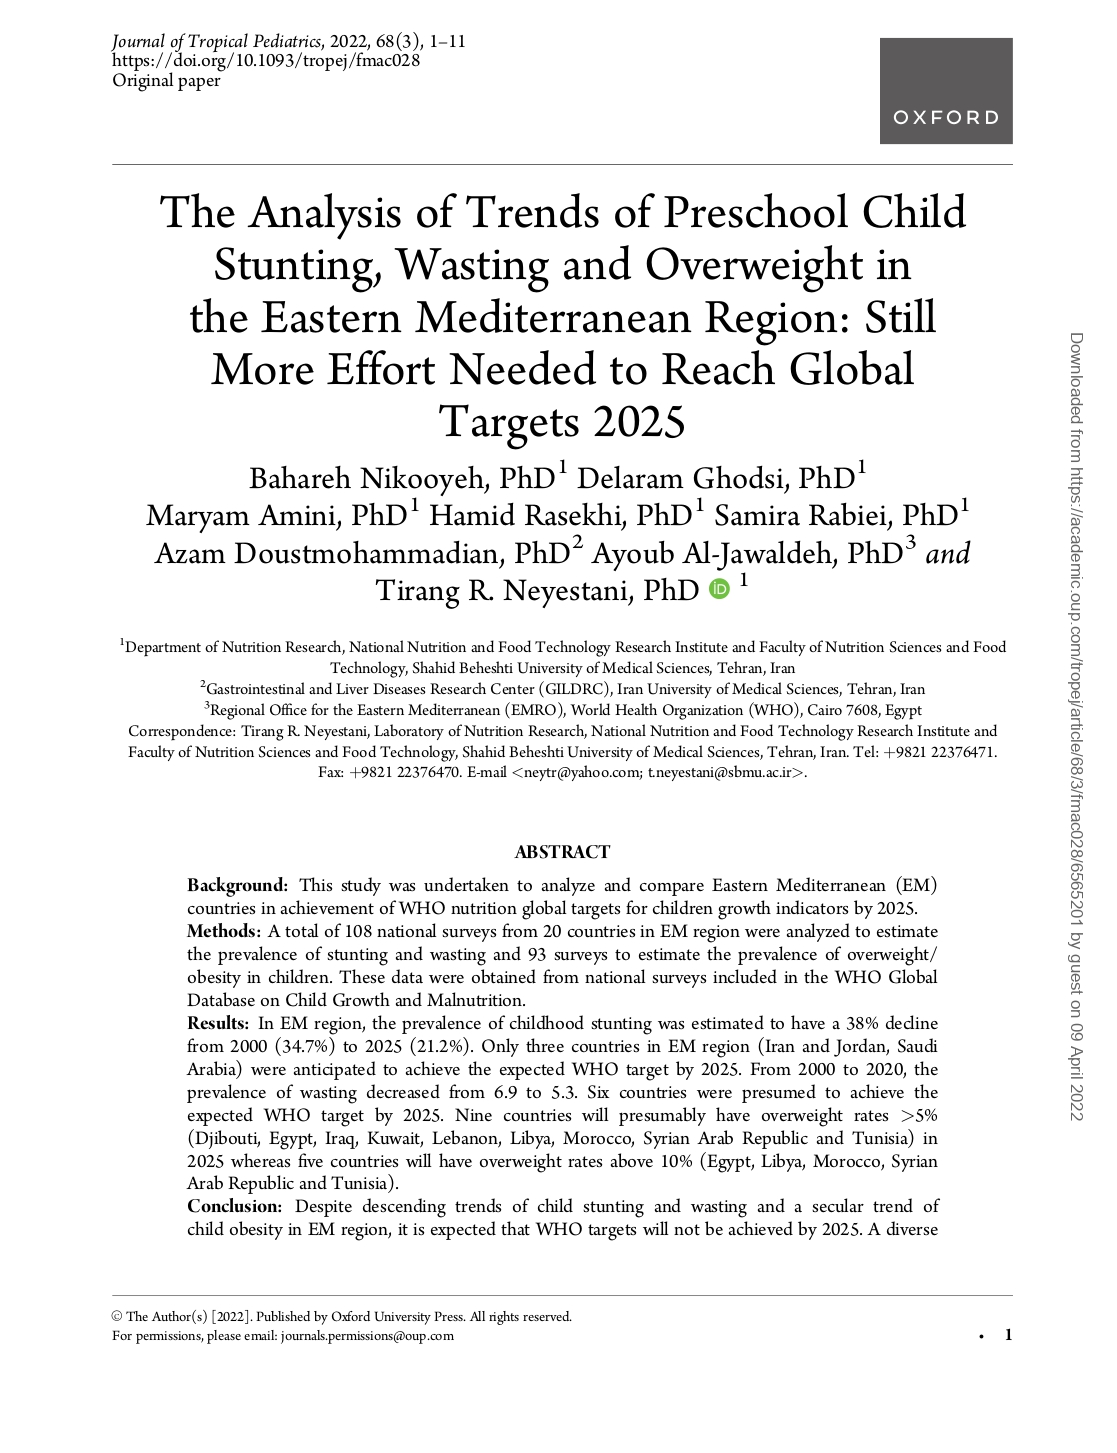 the_analysis_of_trends_of_preschool_child_stunting_wasting_and_overweight_in_the_eastern_mediterranean_region_still_more_effort_needed_to_reach_global_targets_2025